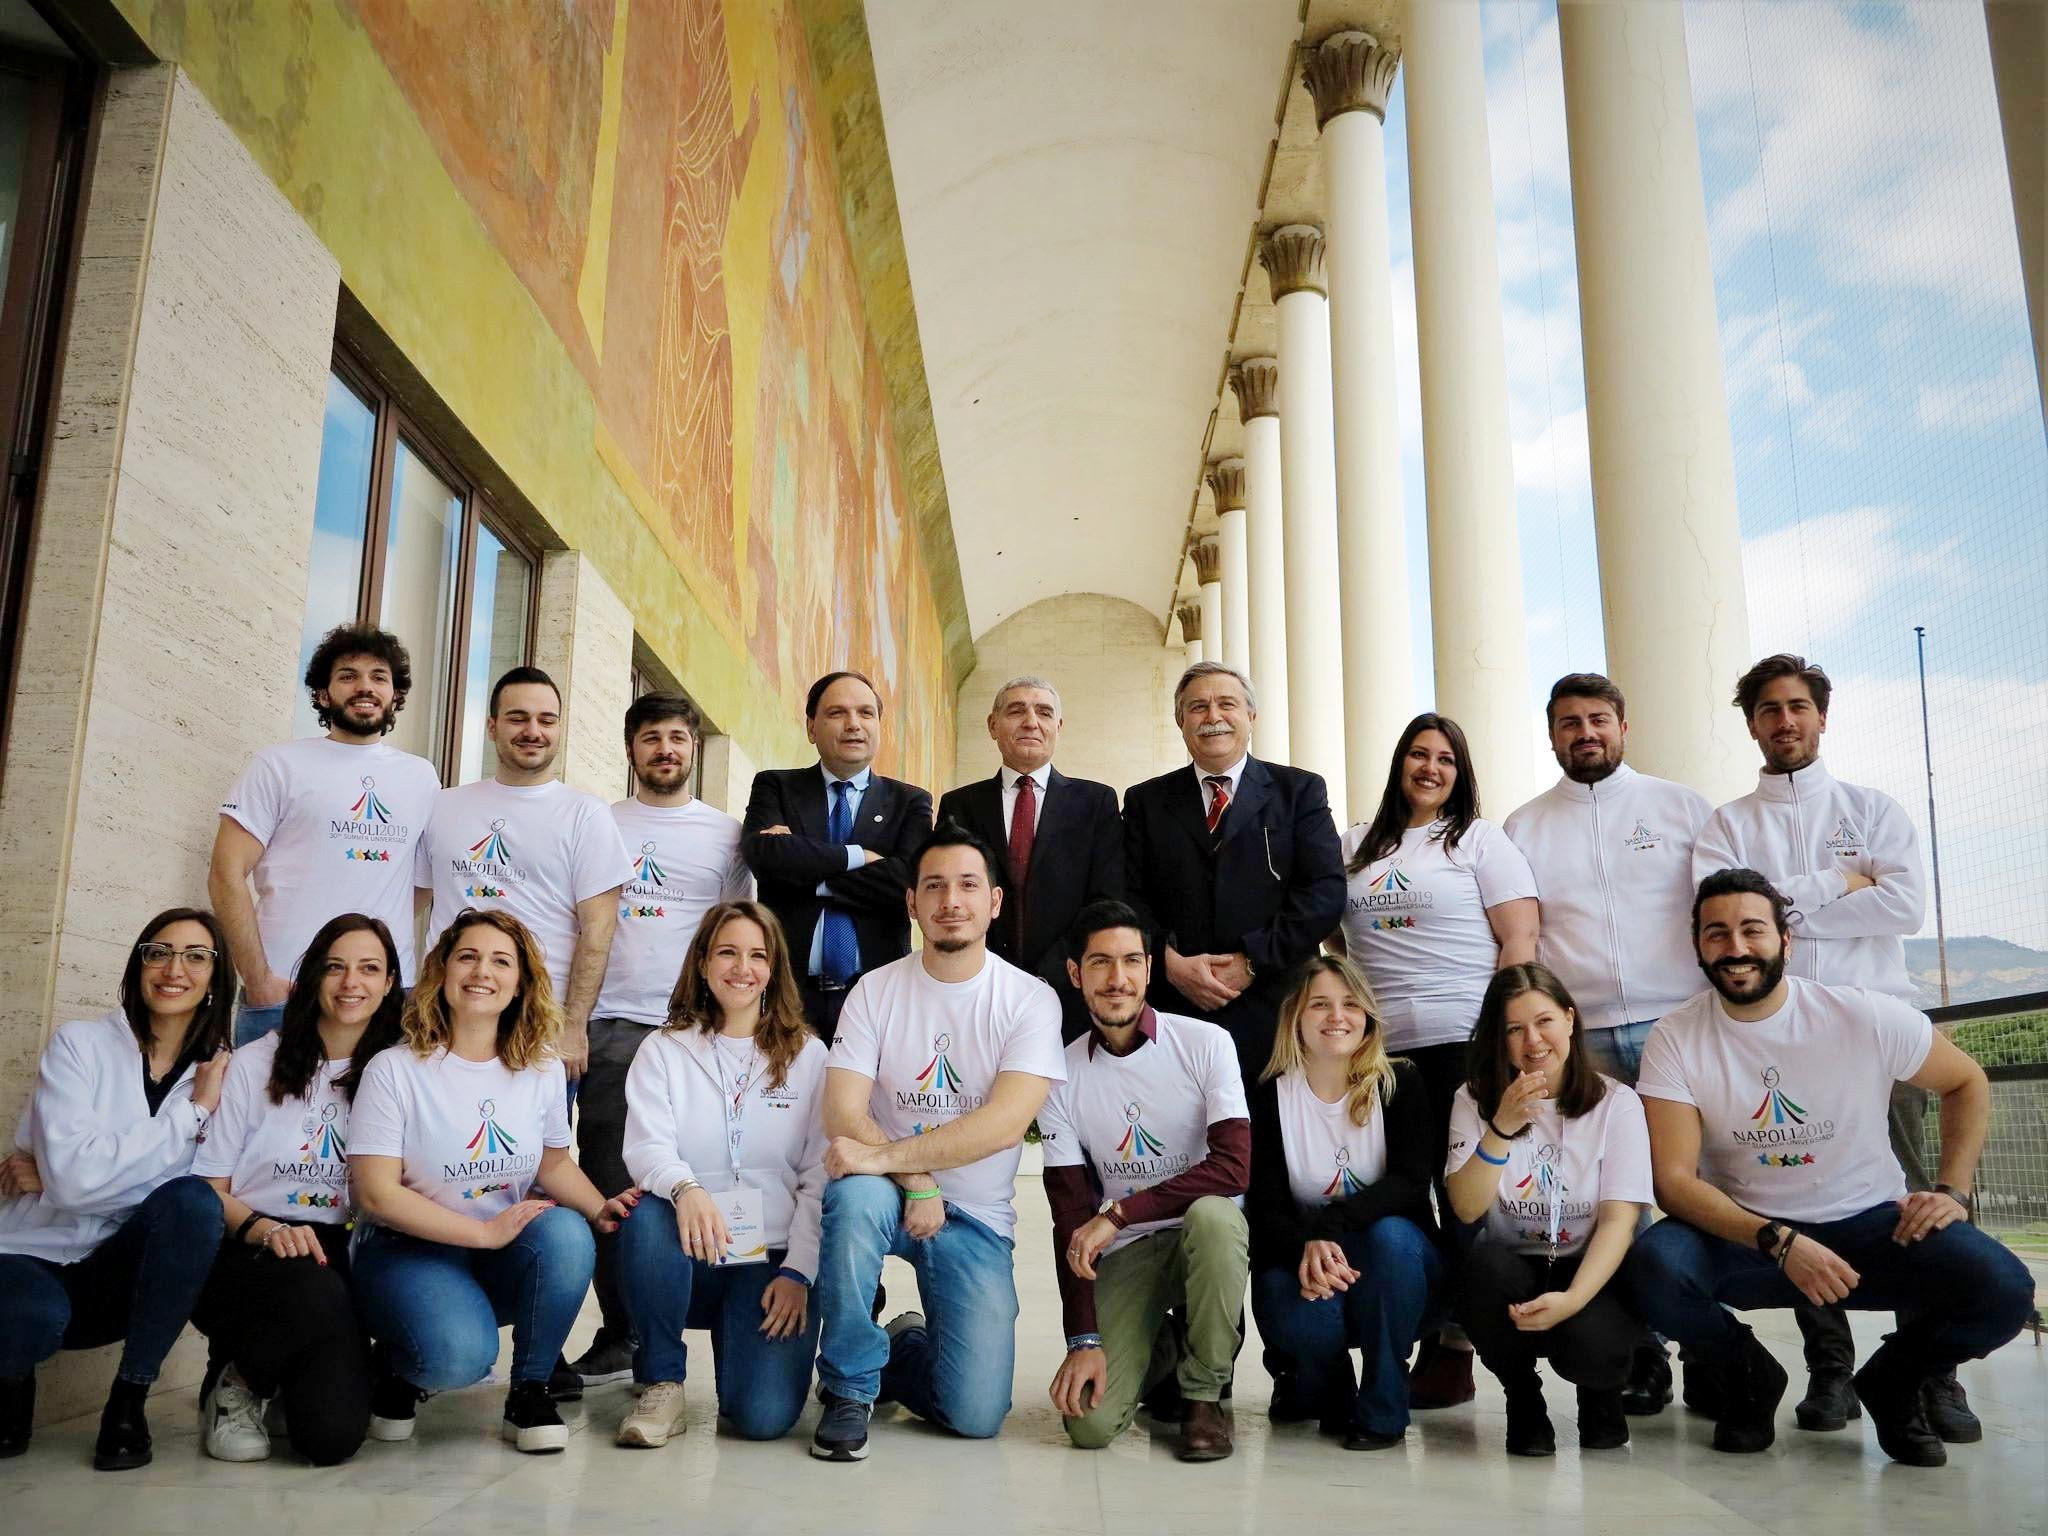 The campaign to recruit volunteers for the Naples 2019 Summer Universiade was launched in March ©Naples 2019